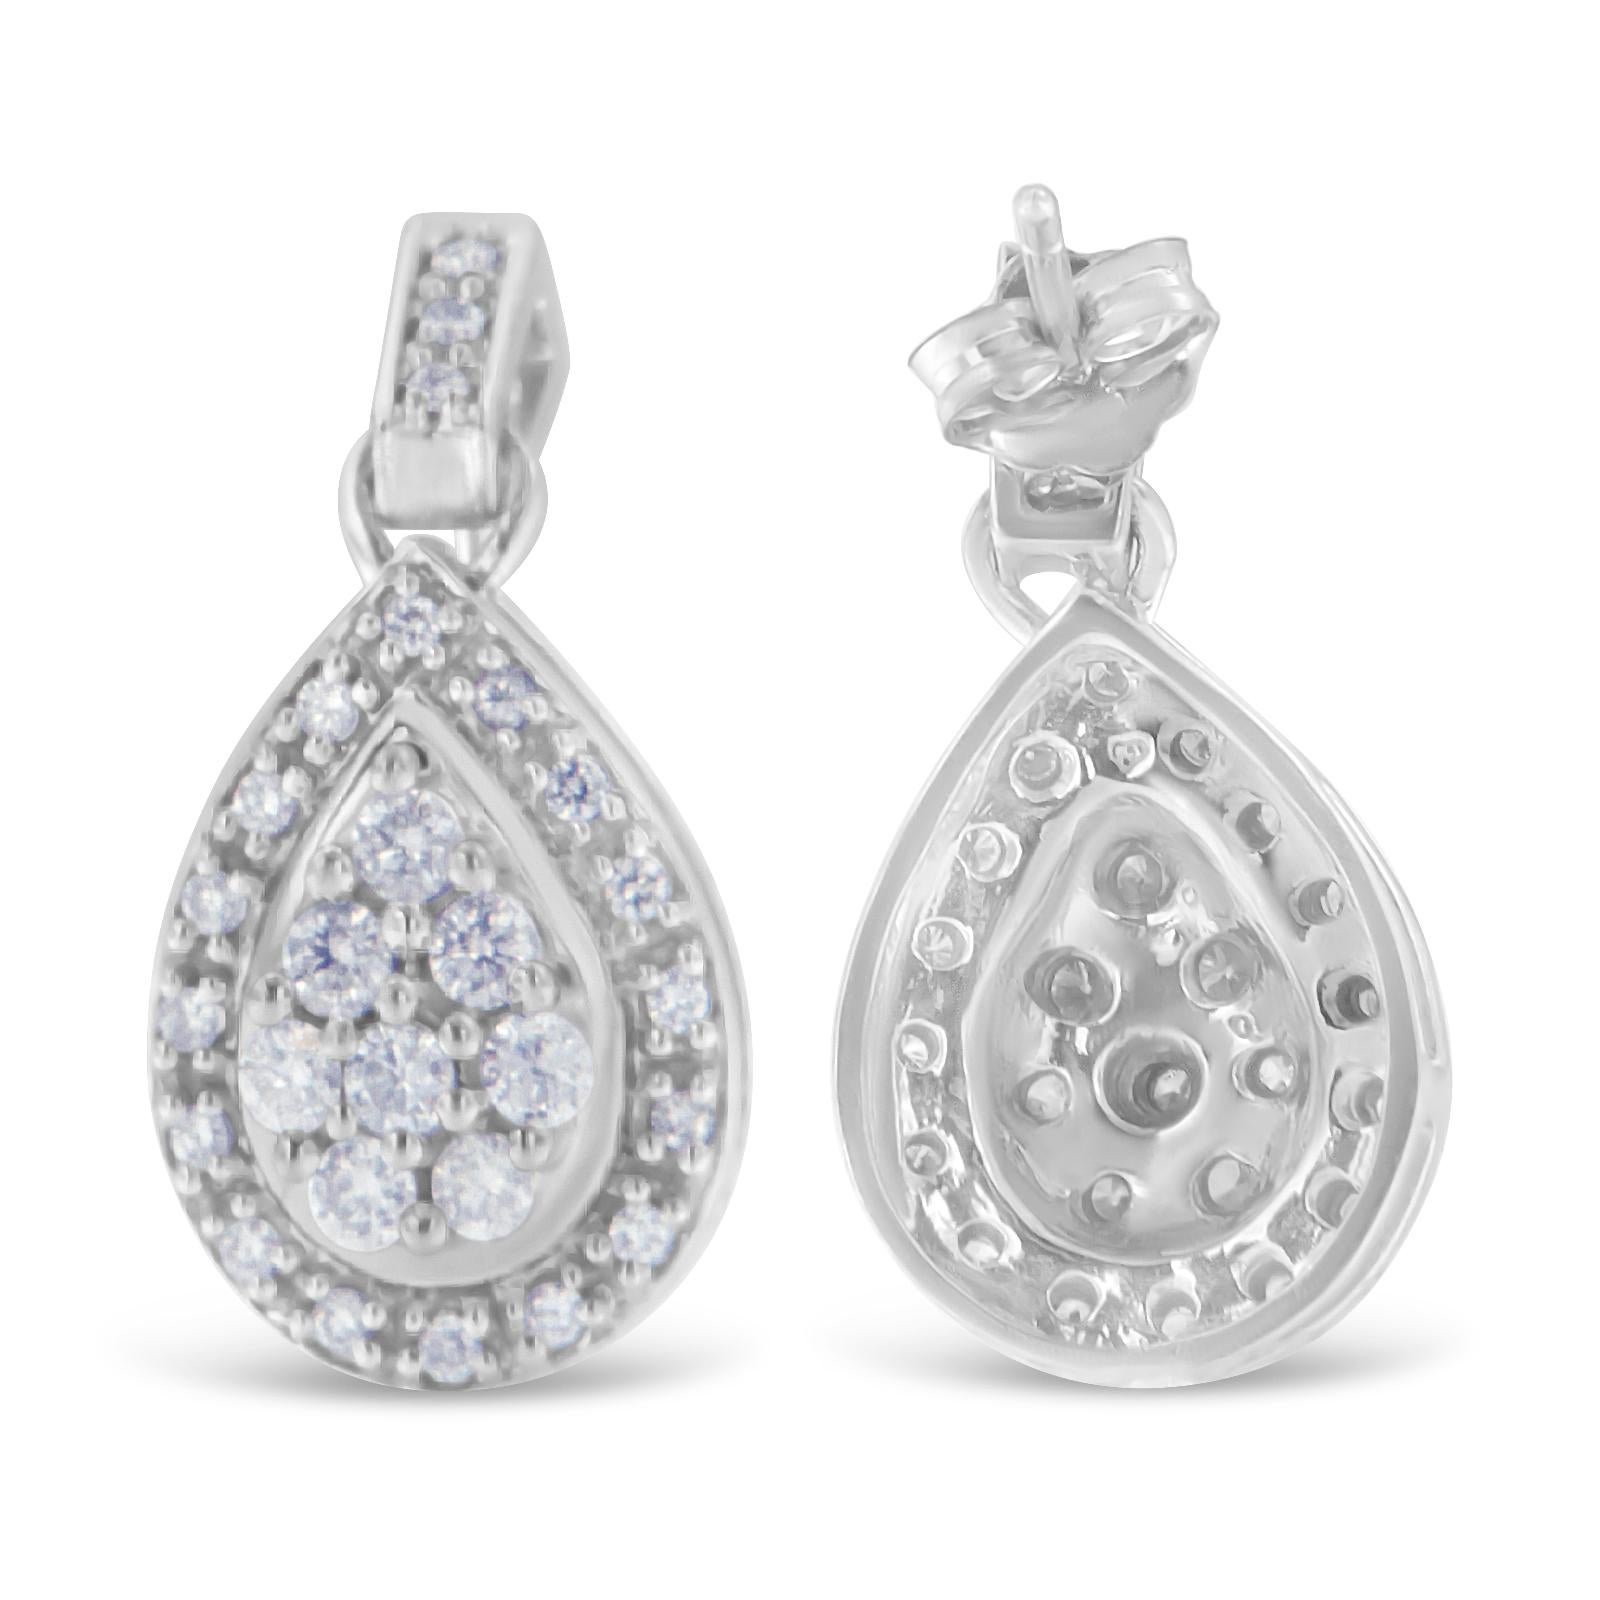 Add some shine and sparkle to your gorgeous look with this pair of dazzling earrings. Fashioned in a teardrop shape, the earrings are crafted from precious 10 karat white gold. Each of the pieces is ornamented with a flickering round cut diamonds